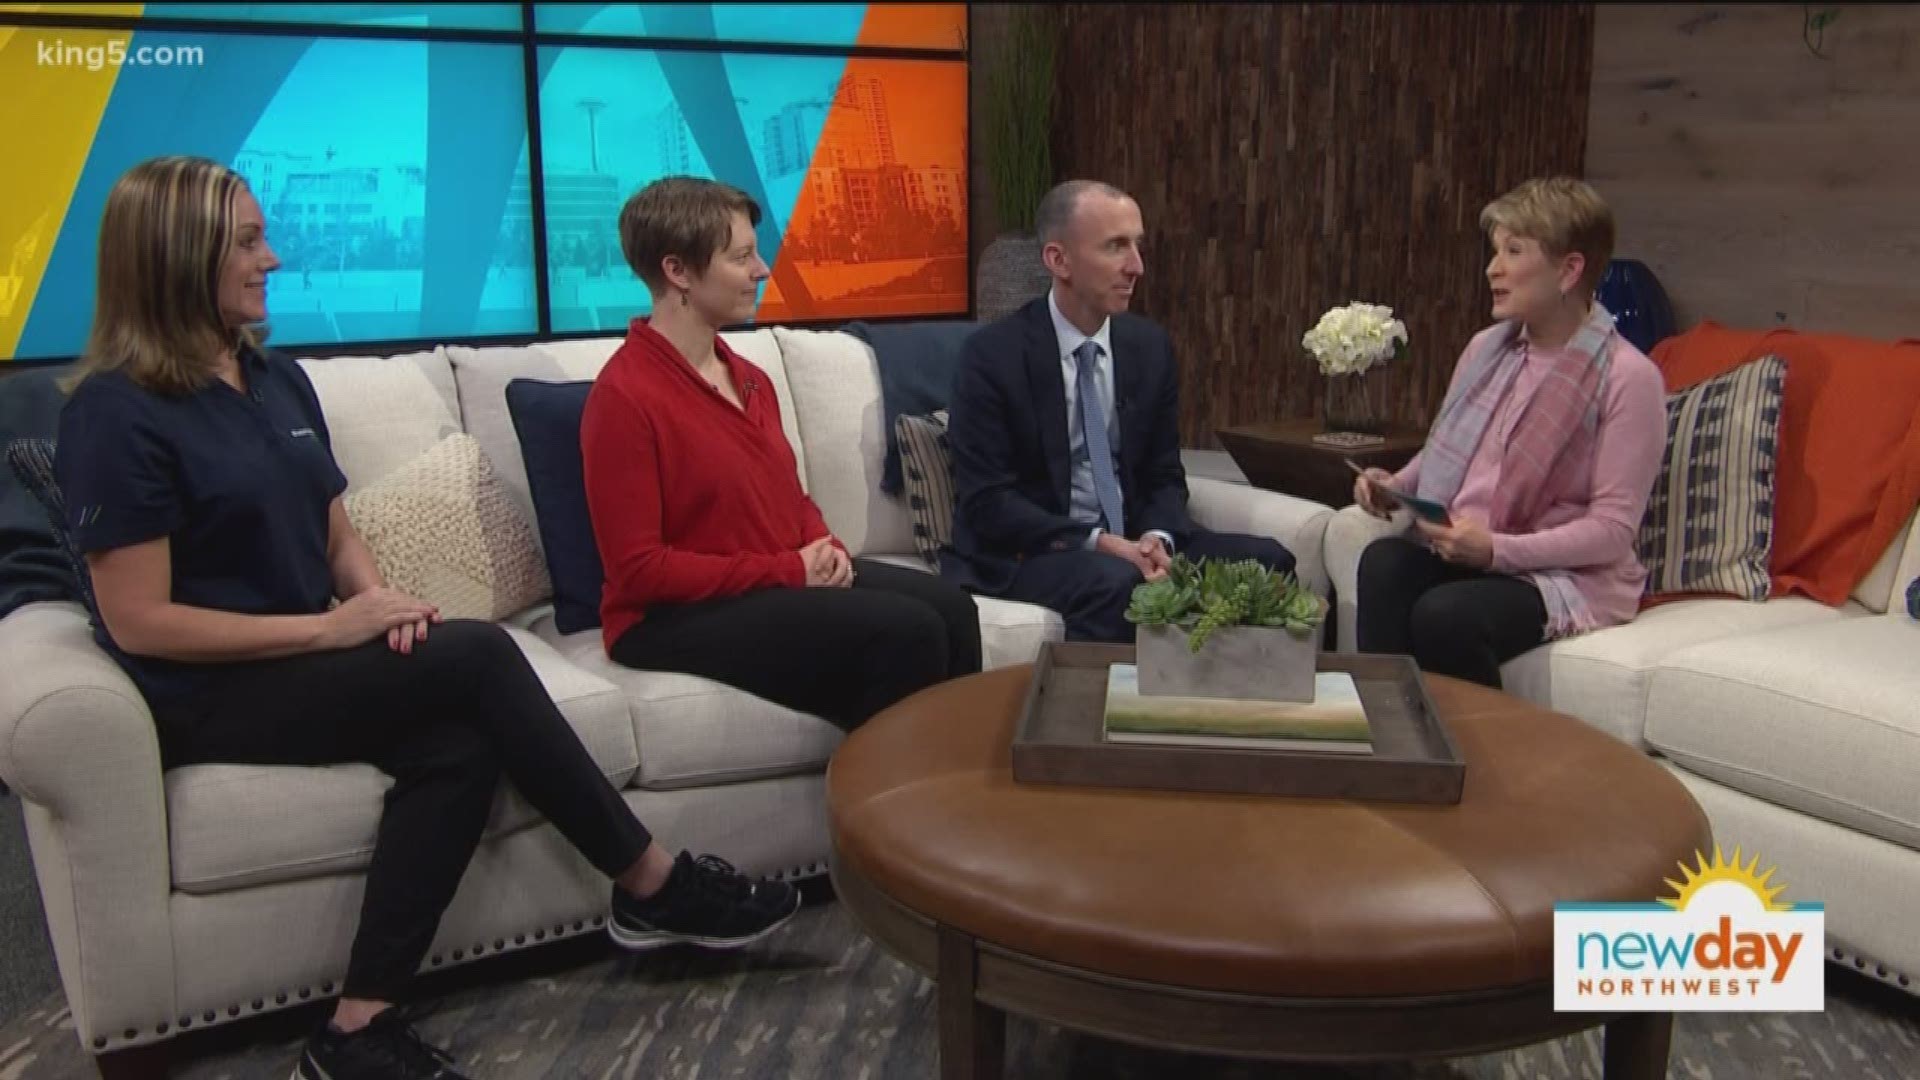 Pediatricians, gatroenterologists and fitness experts weigh in on health issues.